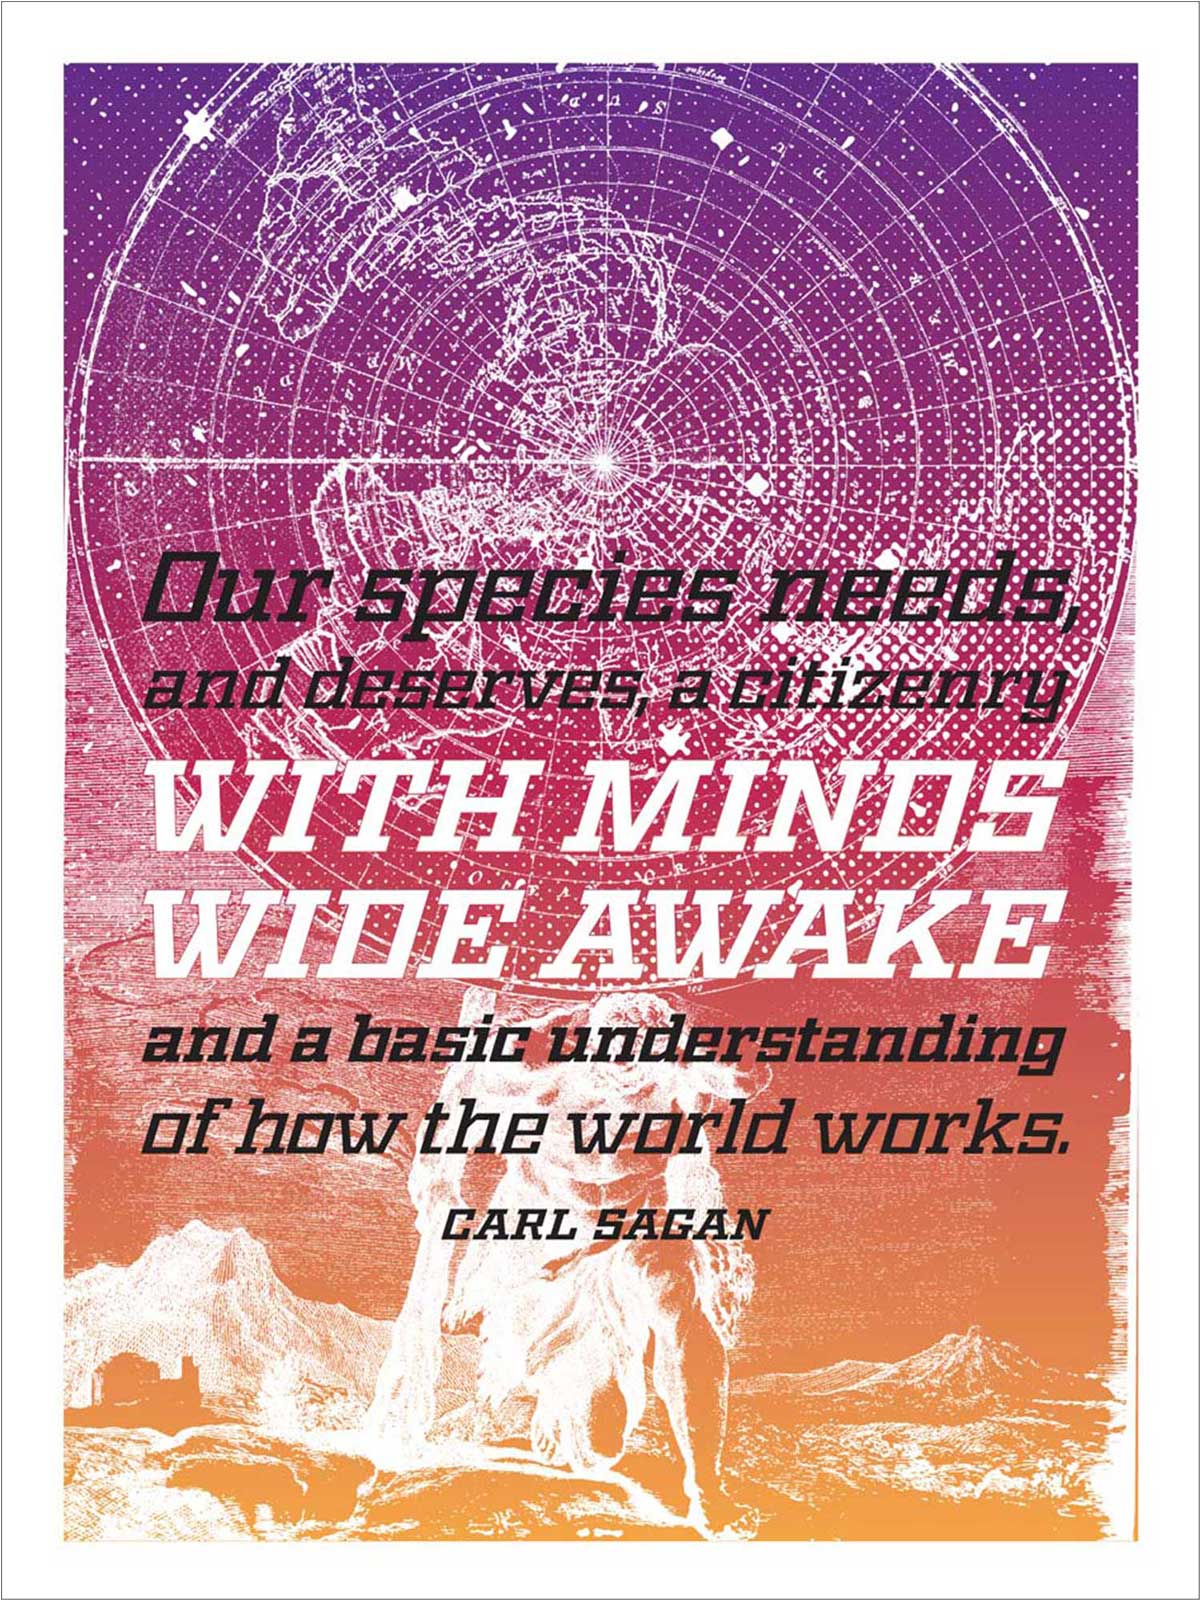 “This poster is a response to the cultural of anti-intellectualism and anti-science. The quote paired with the image of the Greek god Atlas holding up the sky is meant to show how our understanding of the world has evolved over time, yet there are still people who don’t understand (or deny) basic scientific evidence. ”